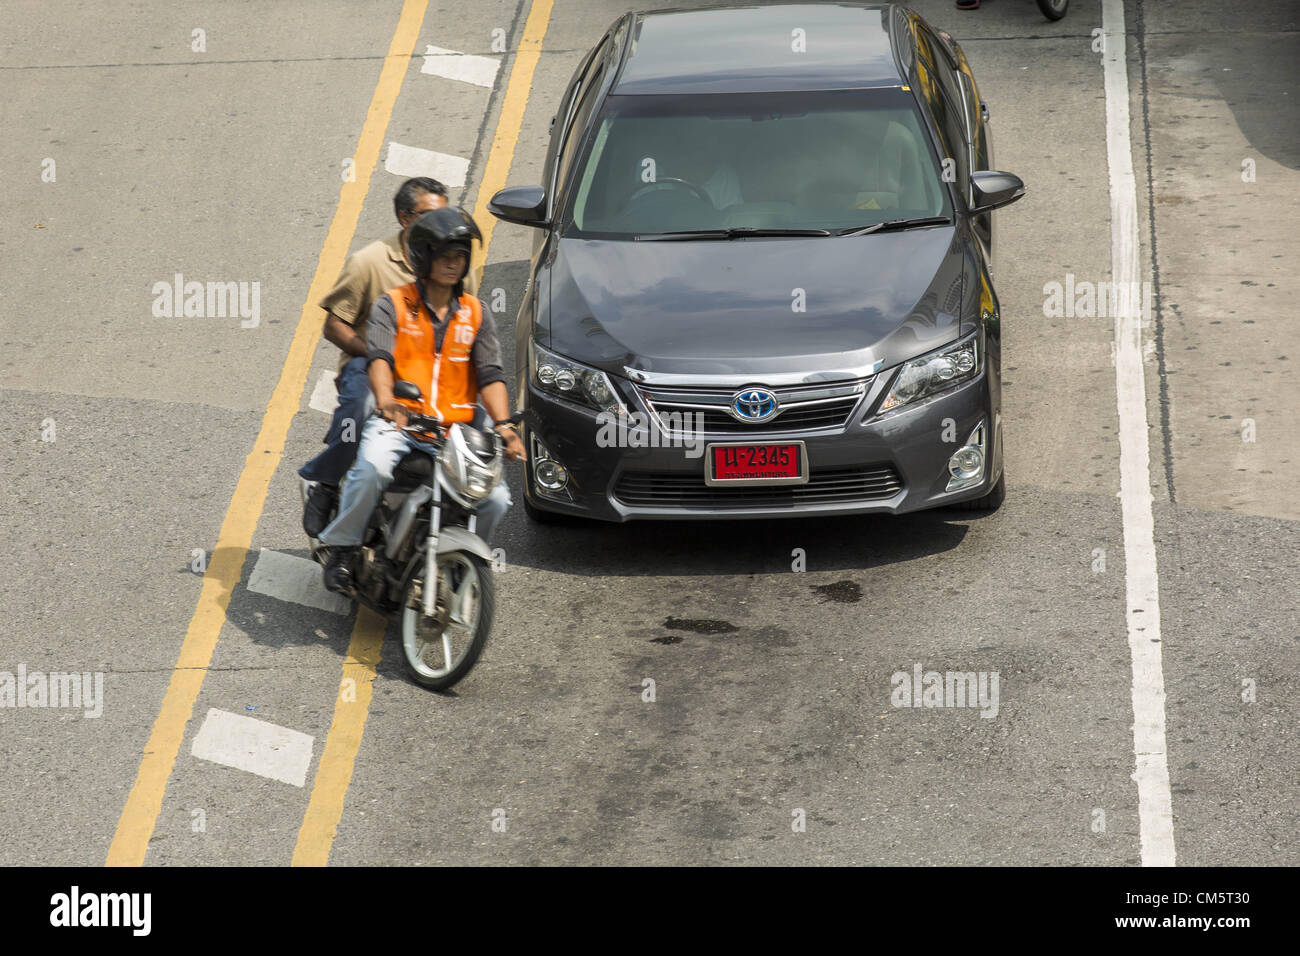 Oct. 11, 2012 - Bangkok, Thailand - A motorcycle taxi pulls in front of a Toyota Camry on a street in Bangkok, Thailand. About 160,000 units of Toyota's popular Camry and Corolla models produced between March 21, 2006 and May 31, 2010 in Thailand are part of Toyota Motor's global recall. Toyota Motor Corp said yesterday it would recall more than 7.4 million vehicles worldwide because the faulty power window switch was a potential fire hazard, the latest in a series of setbacks that have dented the reputation of Japan's biggest automaker. The voluntary move is the biggest single recall since Fo Stock Photo